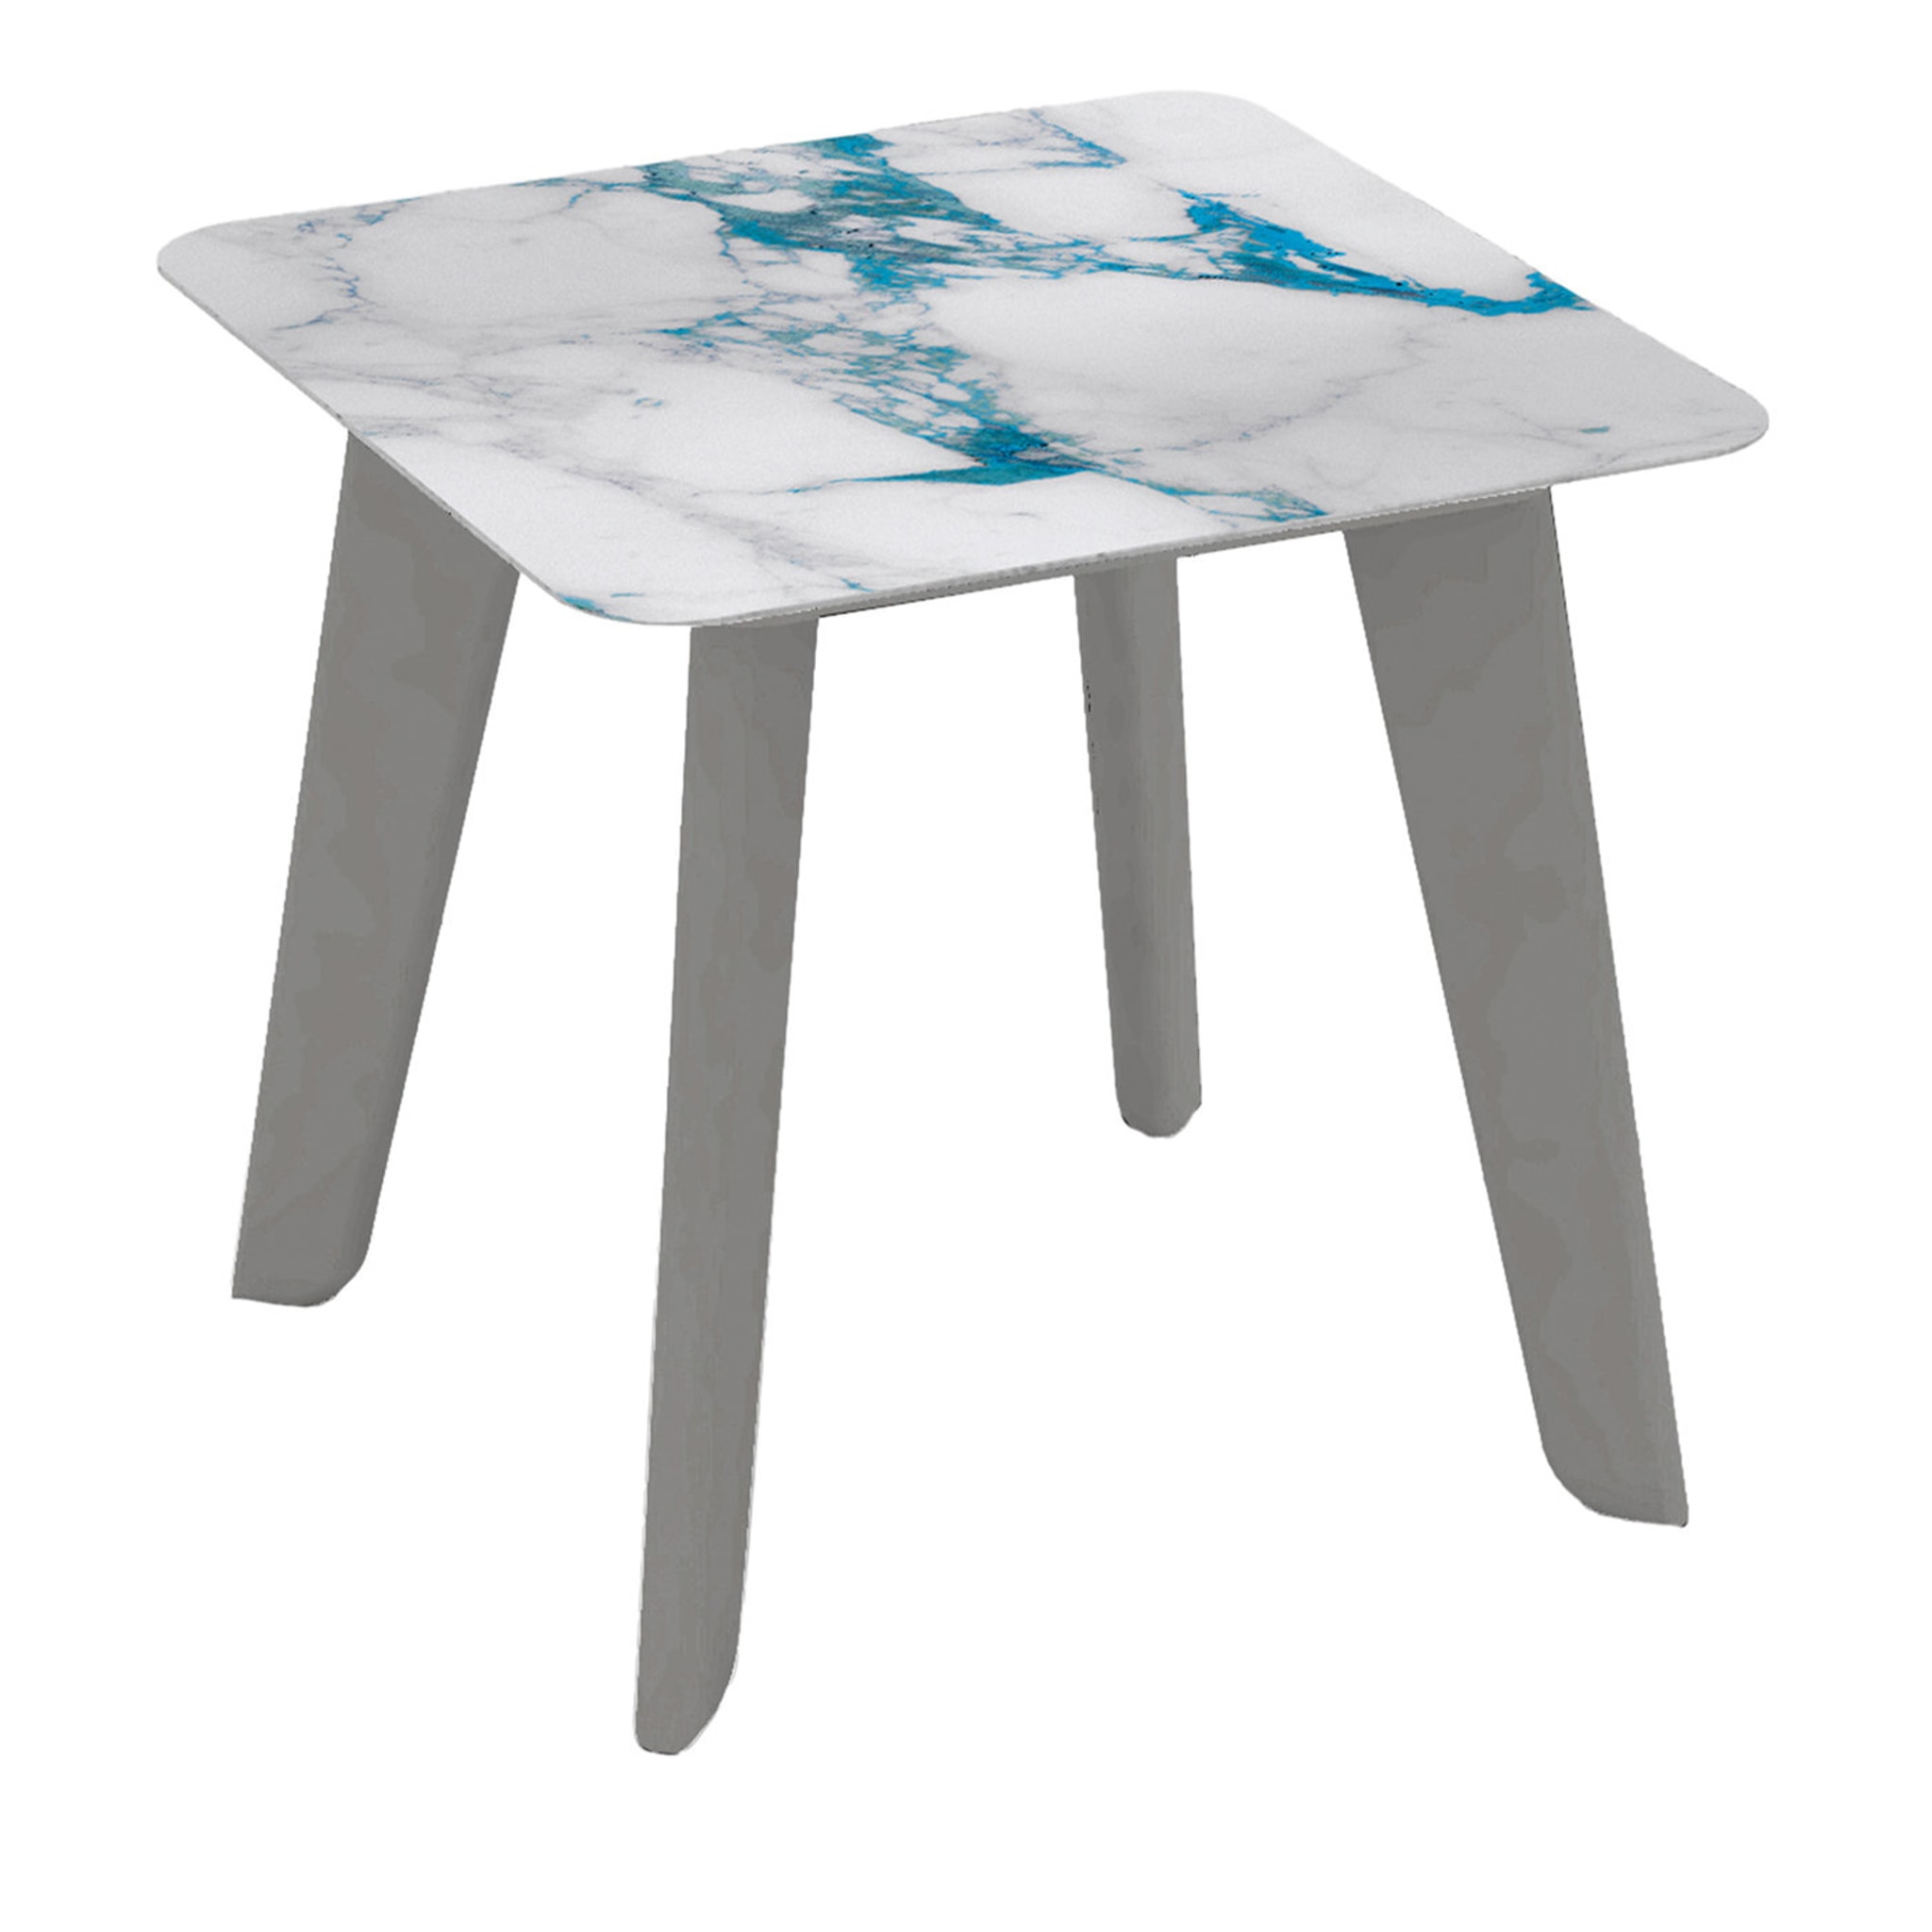 Owen Low Square Side Table with Turquoise and White Top - Main view